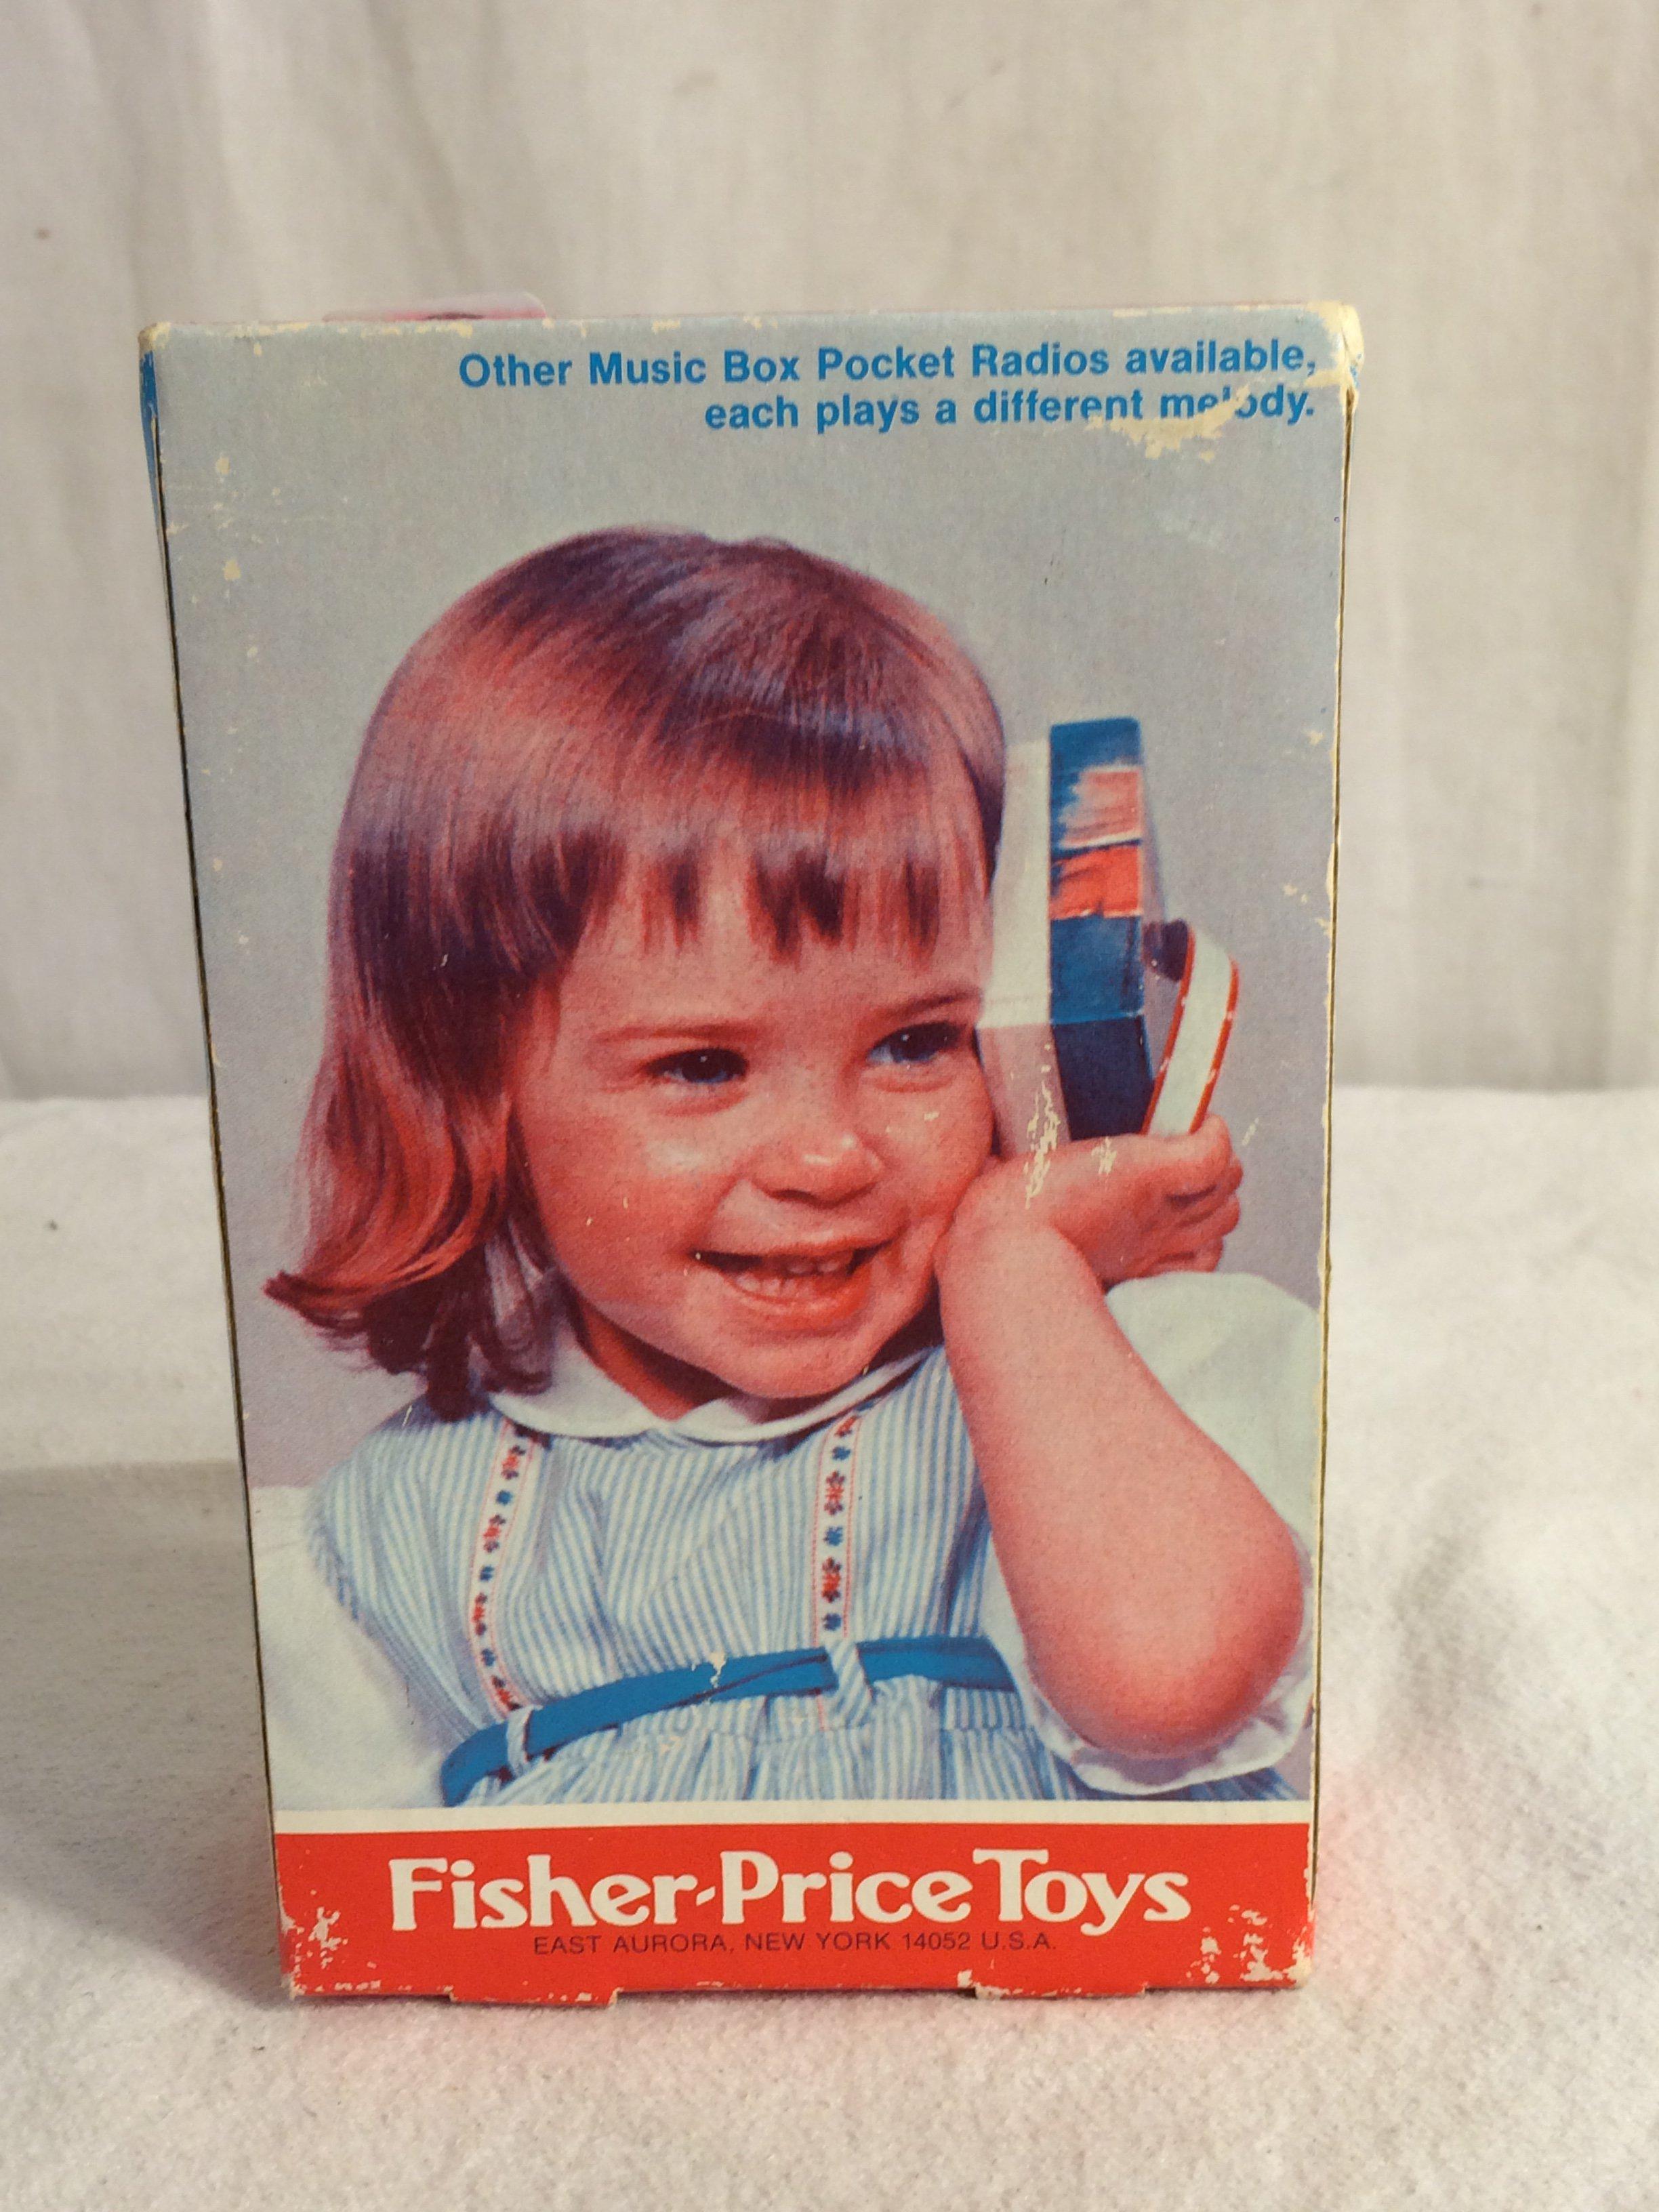 Collector Vintage 1974 Fisher Pirce Toys  Music Box Pocket Radio Size:6.1/2"Tall Box Size